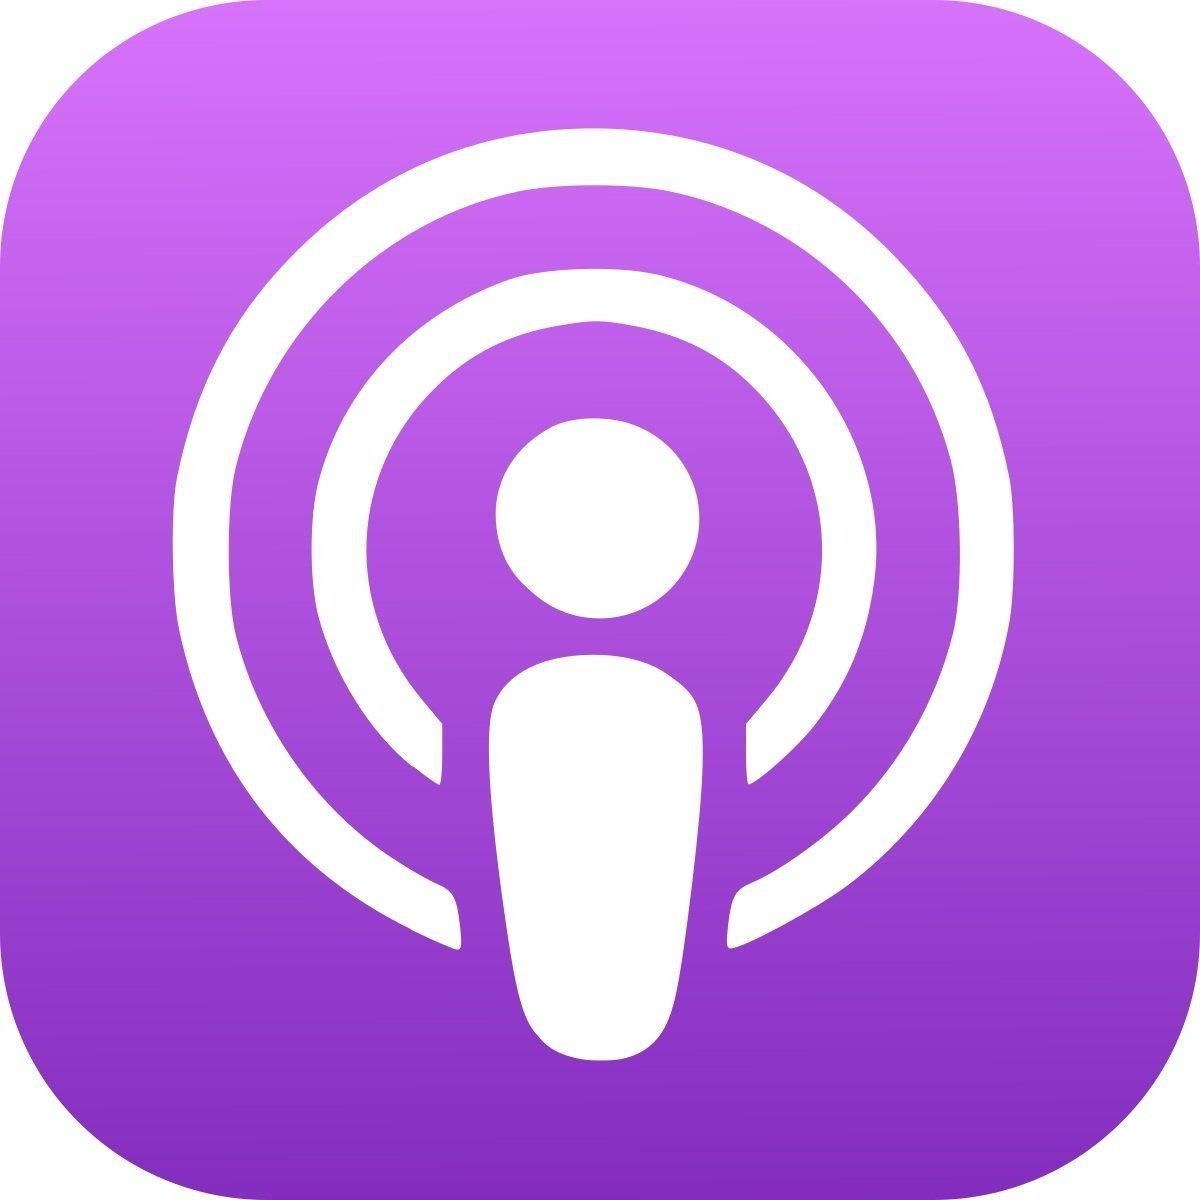  https://podcasts.apple.com/ca/podcast/69-5-passive-income-ideas-you-can-add-to-your-business/id1545153597?i=1000565769978 